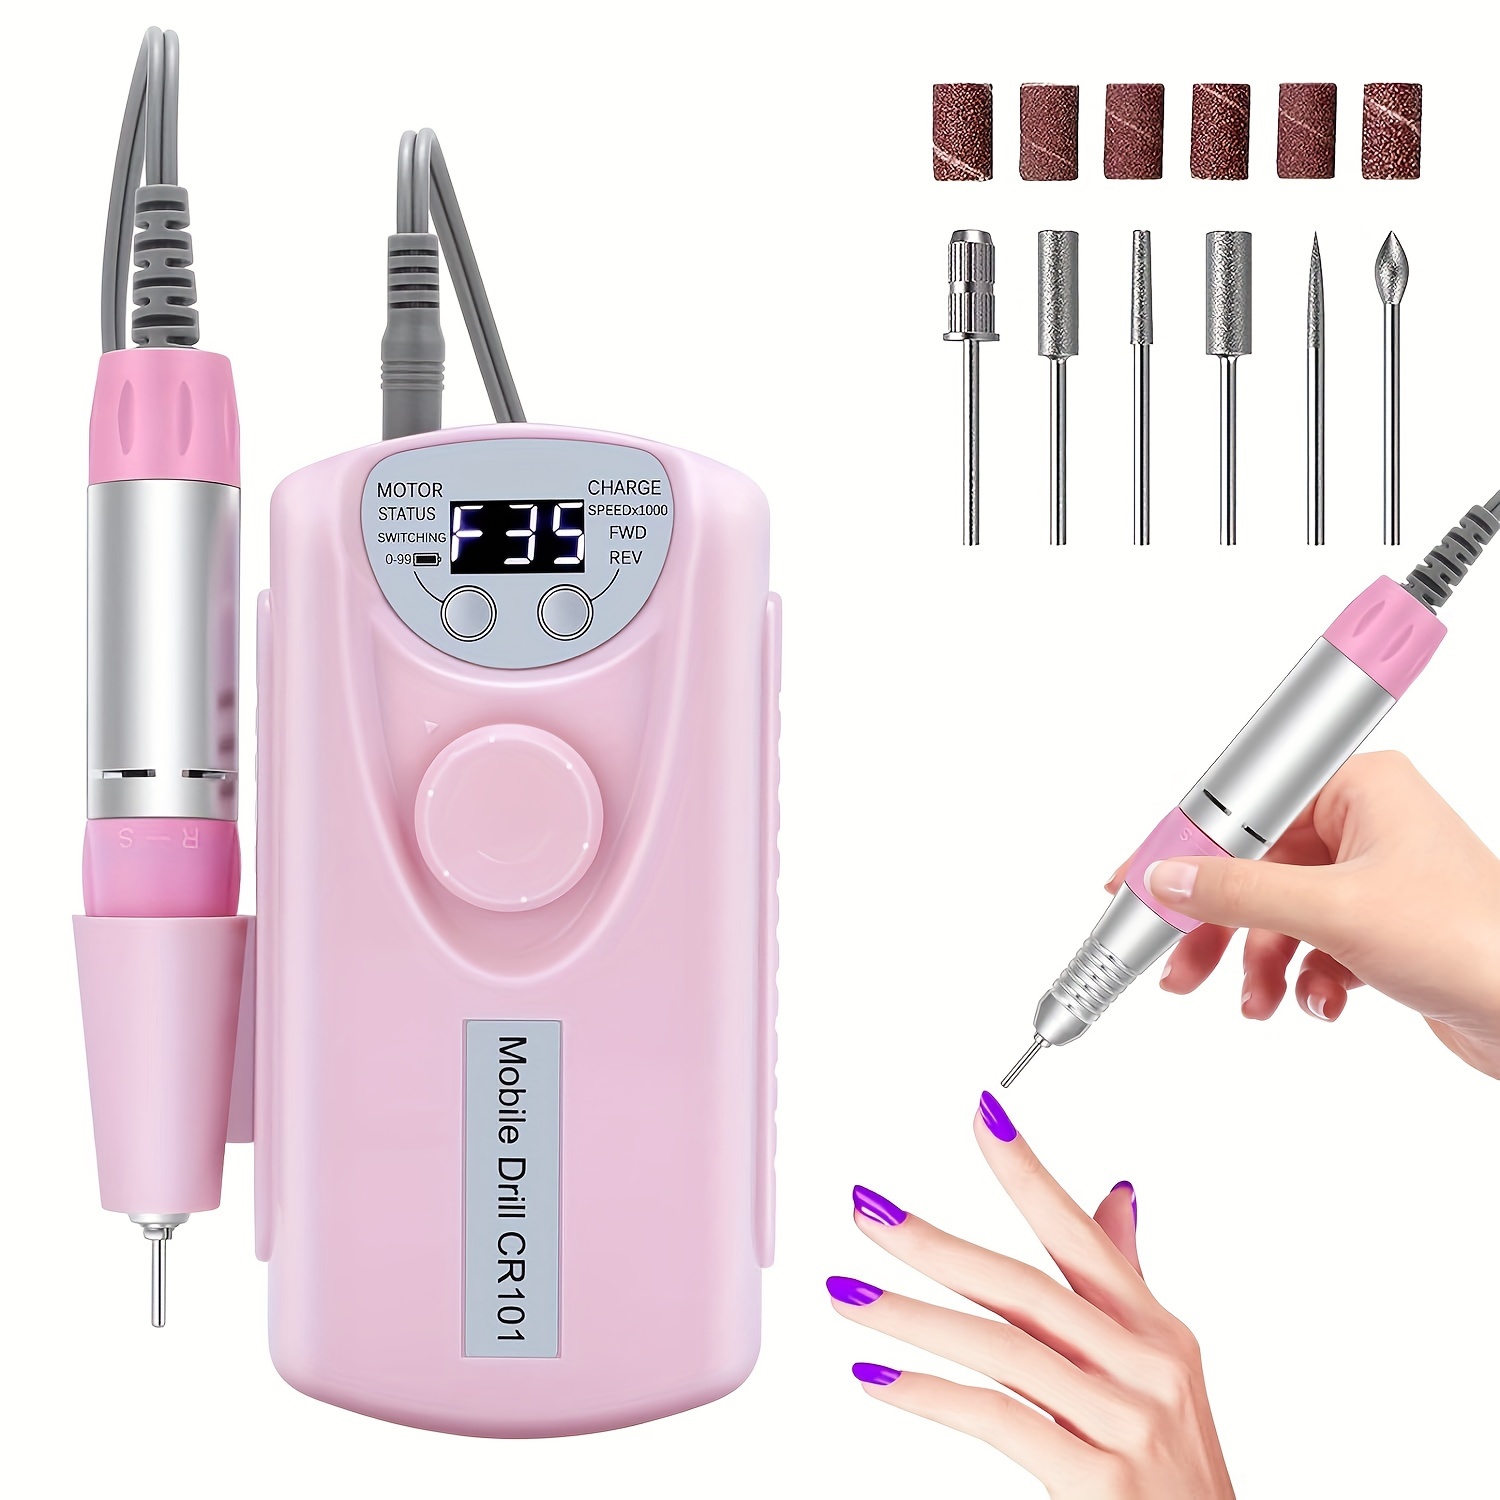 

Portable Electric Nail Drill 35000rpm: Professional Nail File Machine, Cordless Rechargeable Nail Drill E File For Acrylic Nails Remove Nail Gel Polish Manicure For Salon Home With Bits Kit